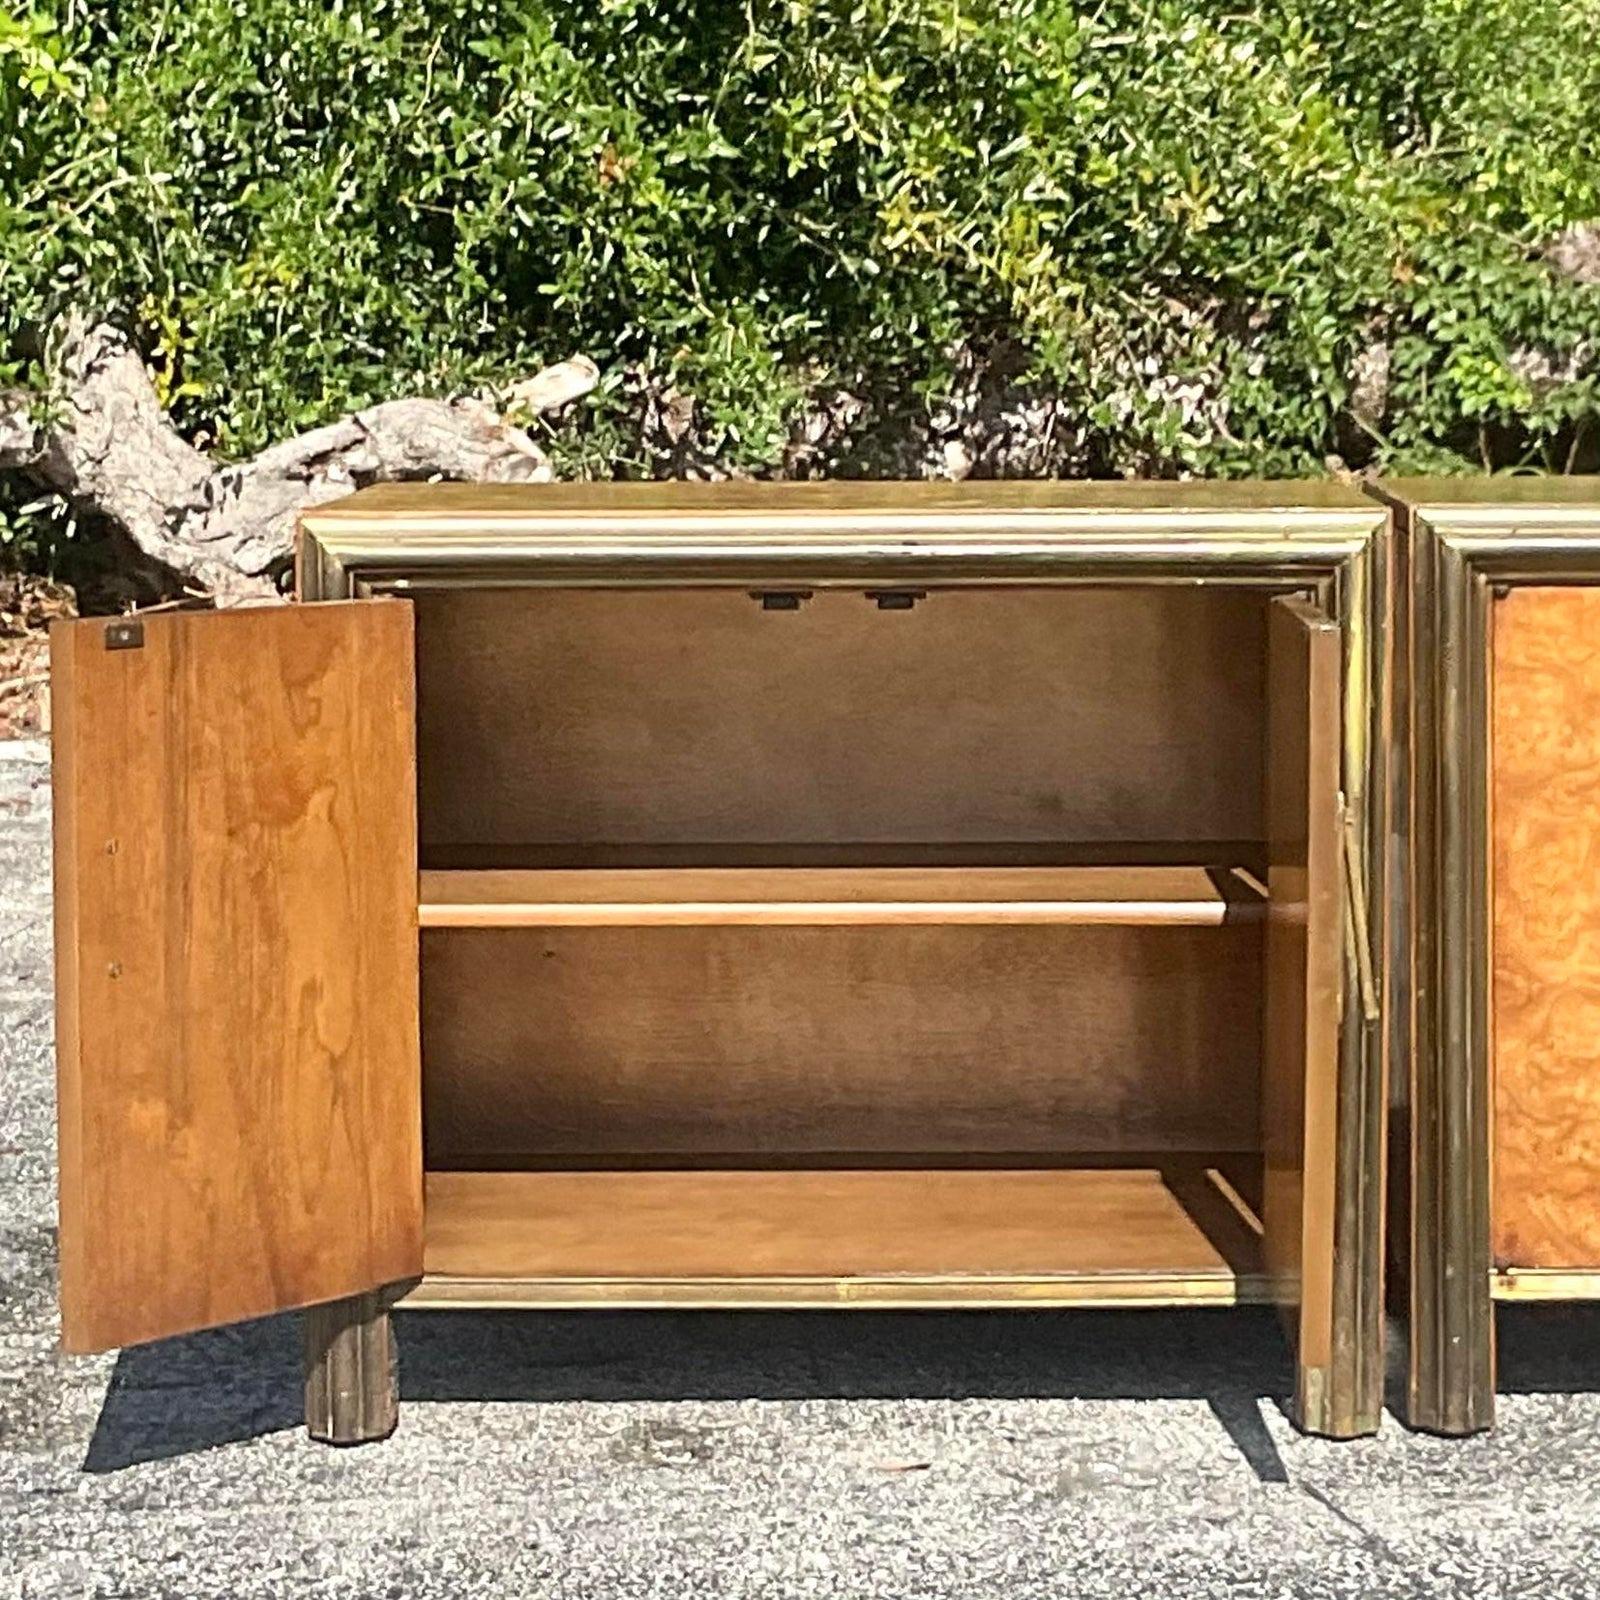 A fabulous pair of vintage Boho nightstands. Made by the iconic Mastercraft group. Beautiful Burl wood cabinet with heavy brass trim. Matching dresser also available. Acquired from a Palm Beach estate.